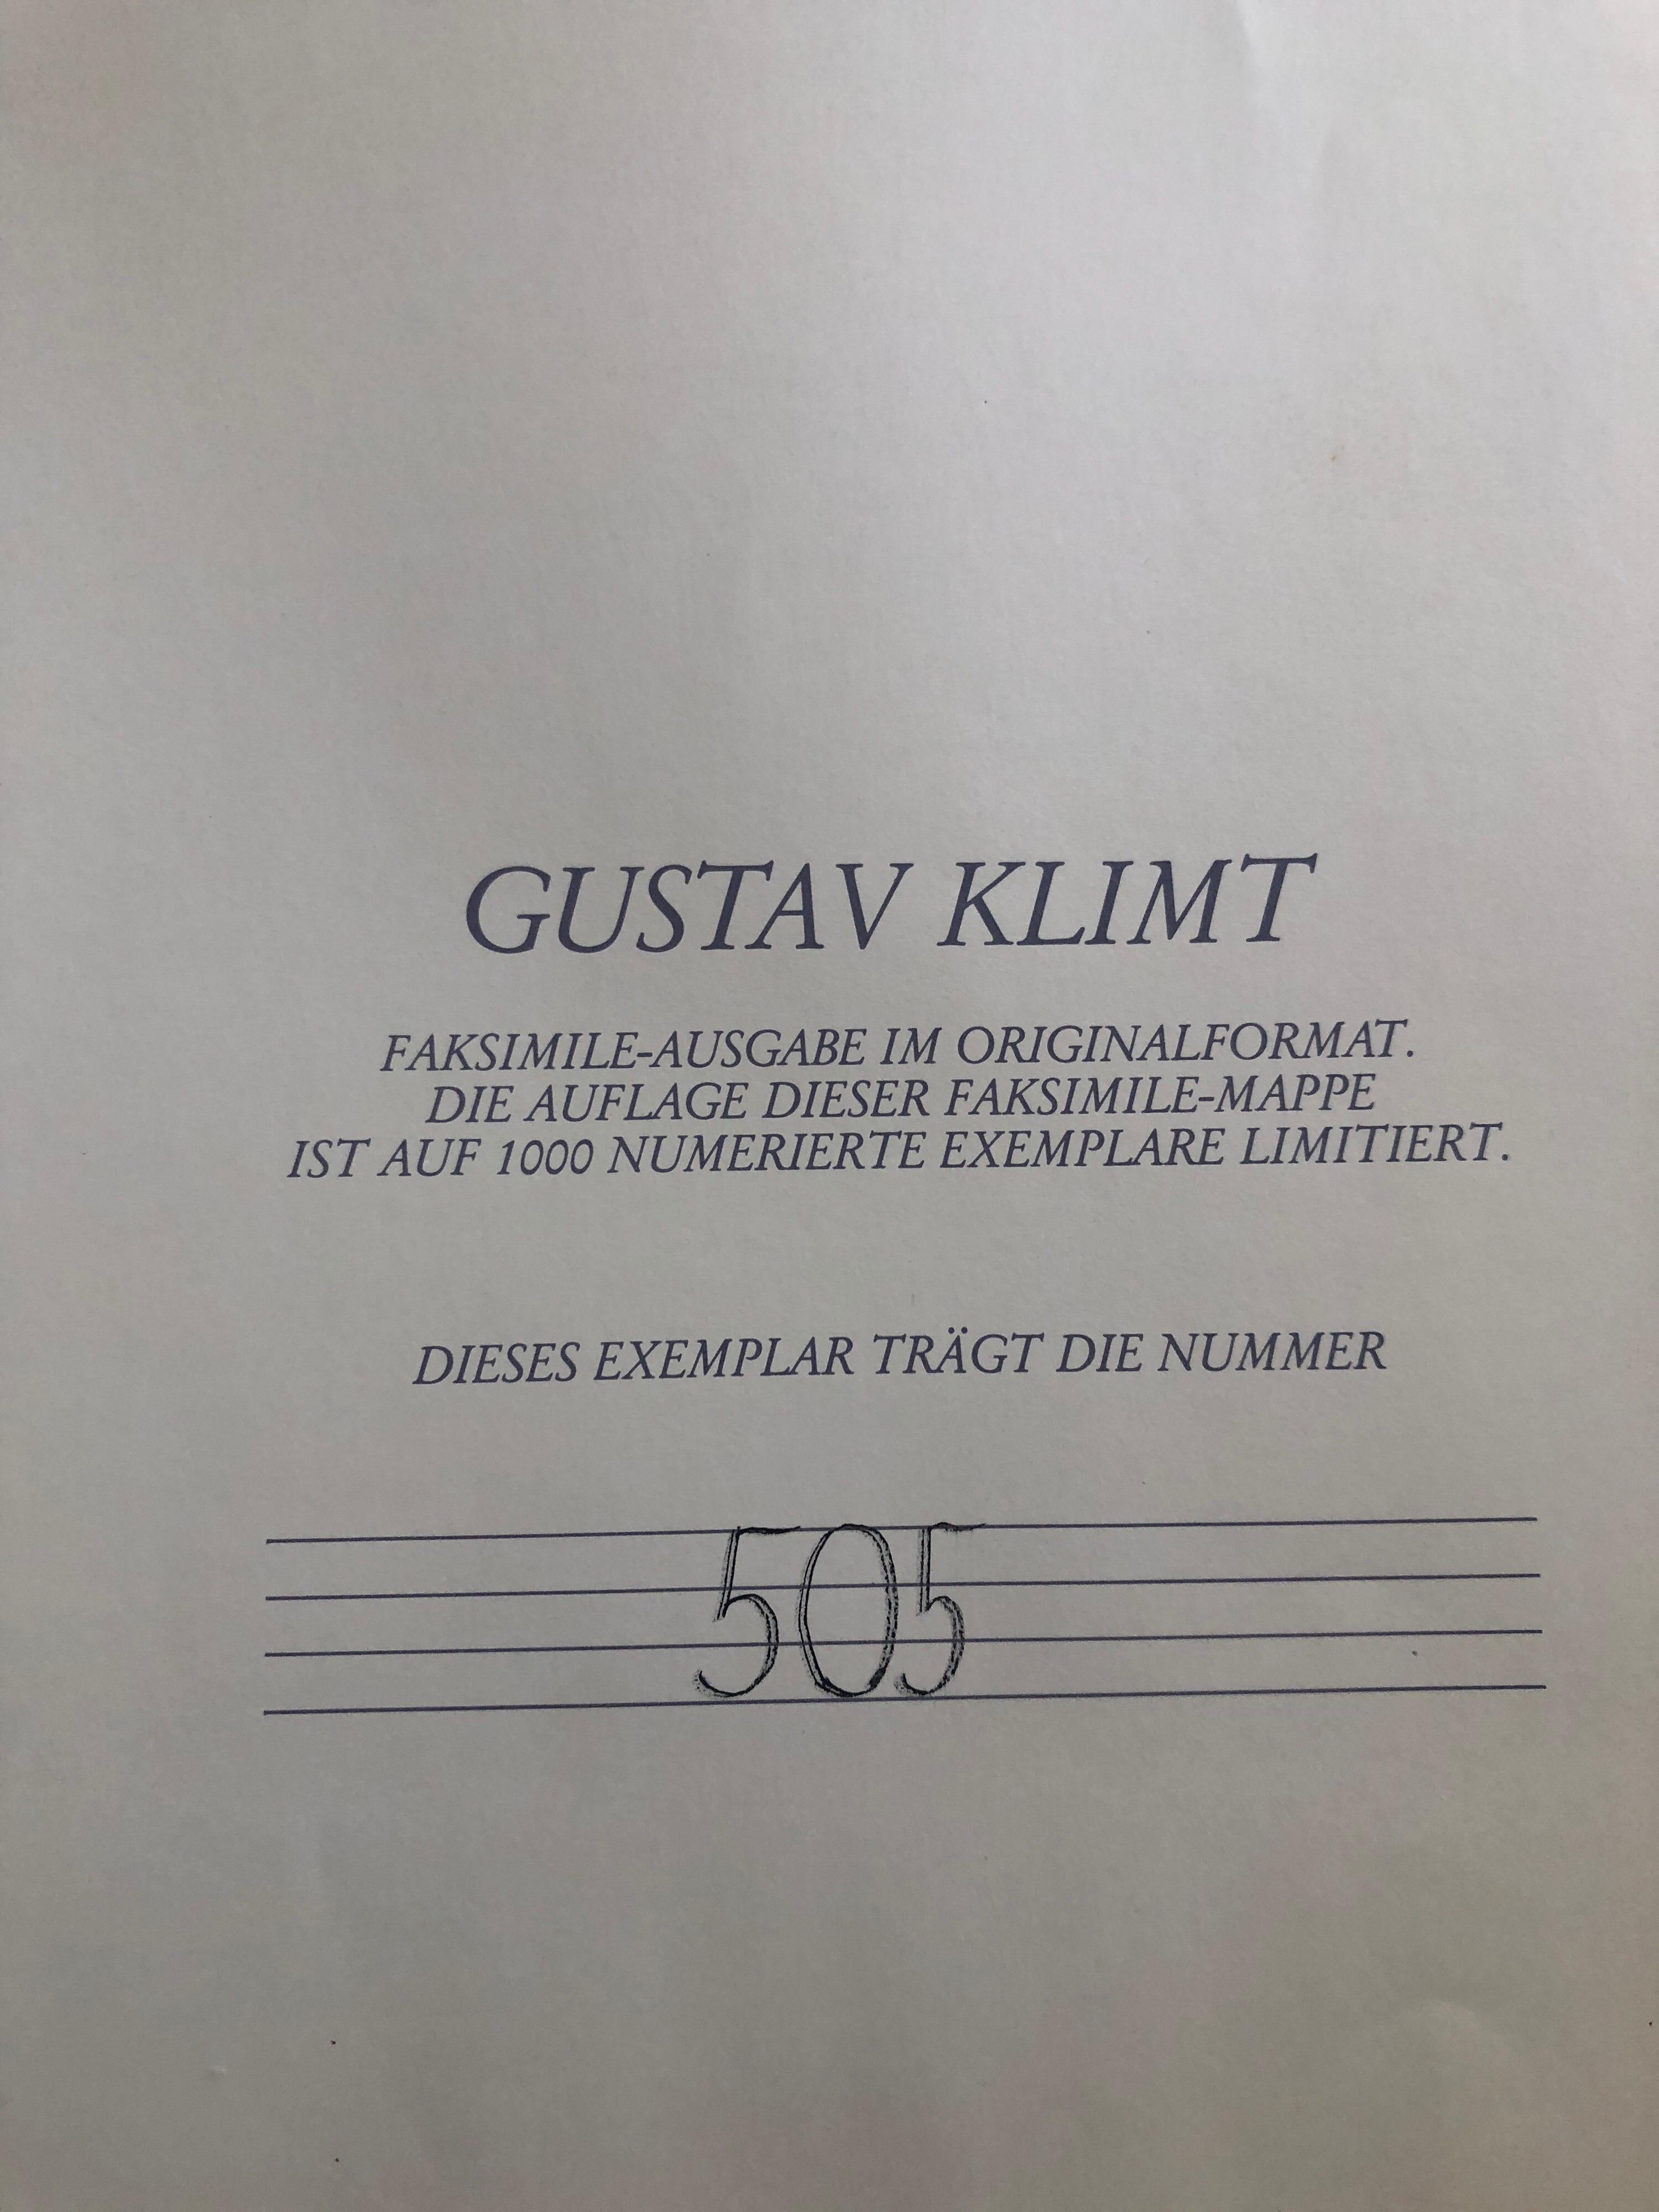 Signed in plate (or stamped with nachlass stamp), also with blind stamp from publisher; from limited edition of 1000 hand numbered; Published in Graz Austria in 1985. The justification sheet is not included.

Gustav Klimt (July 14, 1862 – February